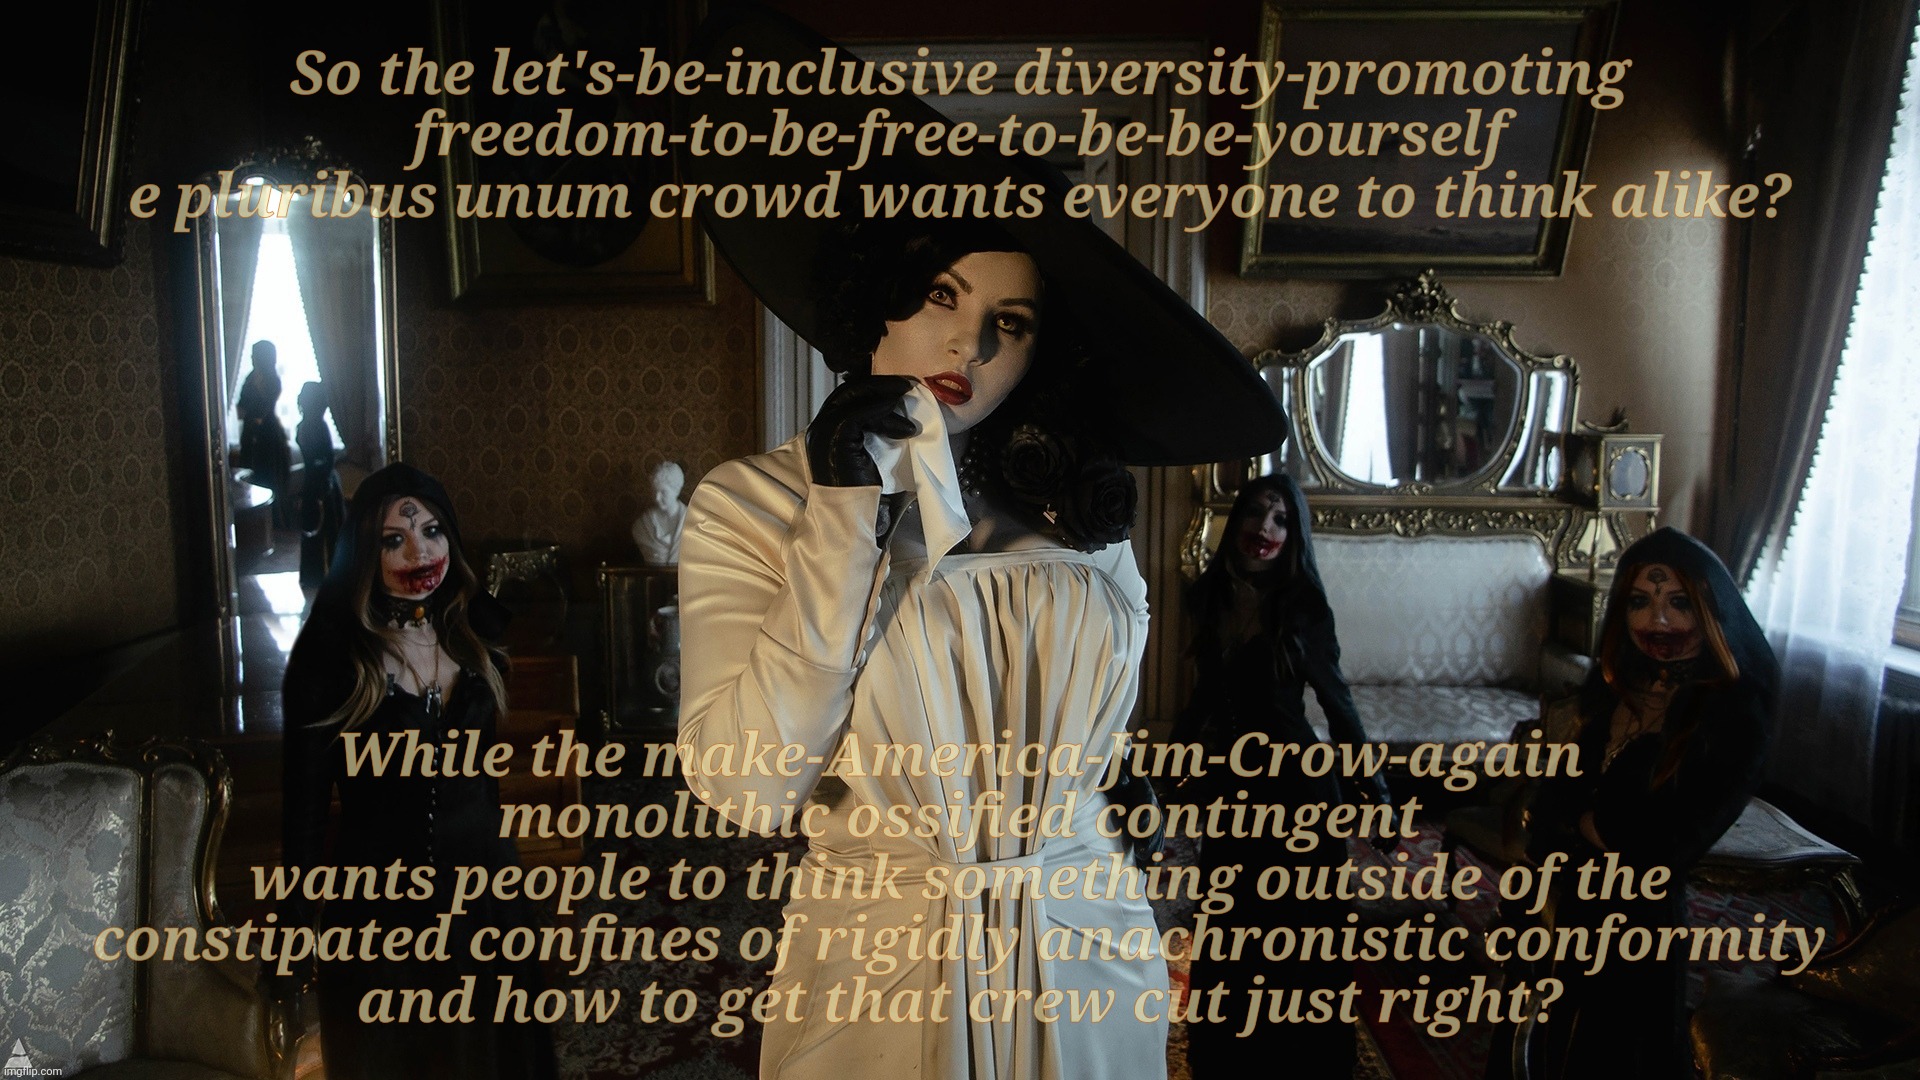 Freedom to be You vs Freedom to be a Clone | So the let's-be-inclusive diversity-promoting
freedom-to-be-free-to-be-be-yourself
e pluribus unum crowd wants everyone to think alike? While the make-America-Jim-Crow-again
monolithic ossified contingent
wants people to think something outside of the constipated confines of rigidly anachronistic conformity
and how to get that crew cut just right? | image tagged in lady dimitrescu and daughters,diversity,e pluribus unum,vs,clones,conformity | made w/ Imgflip meme maker